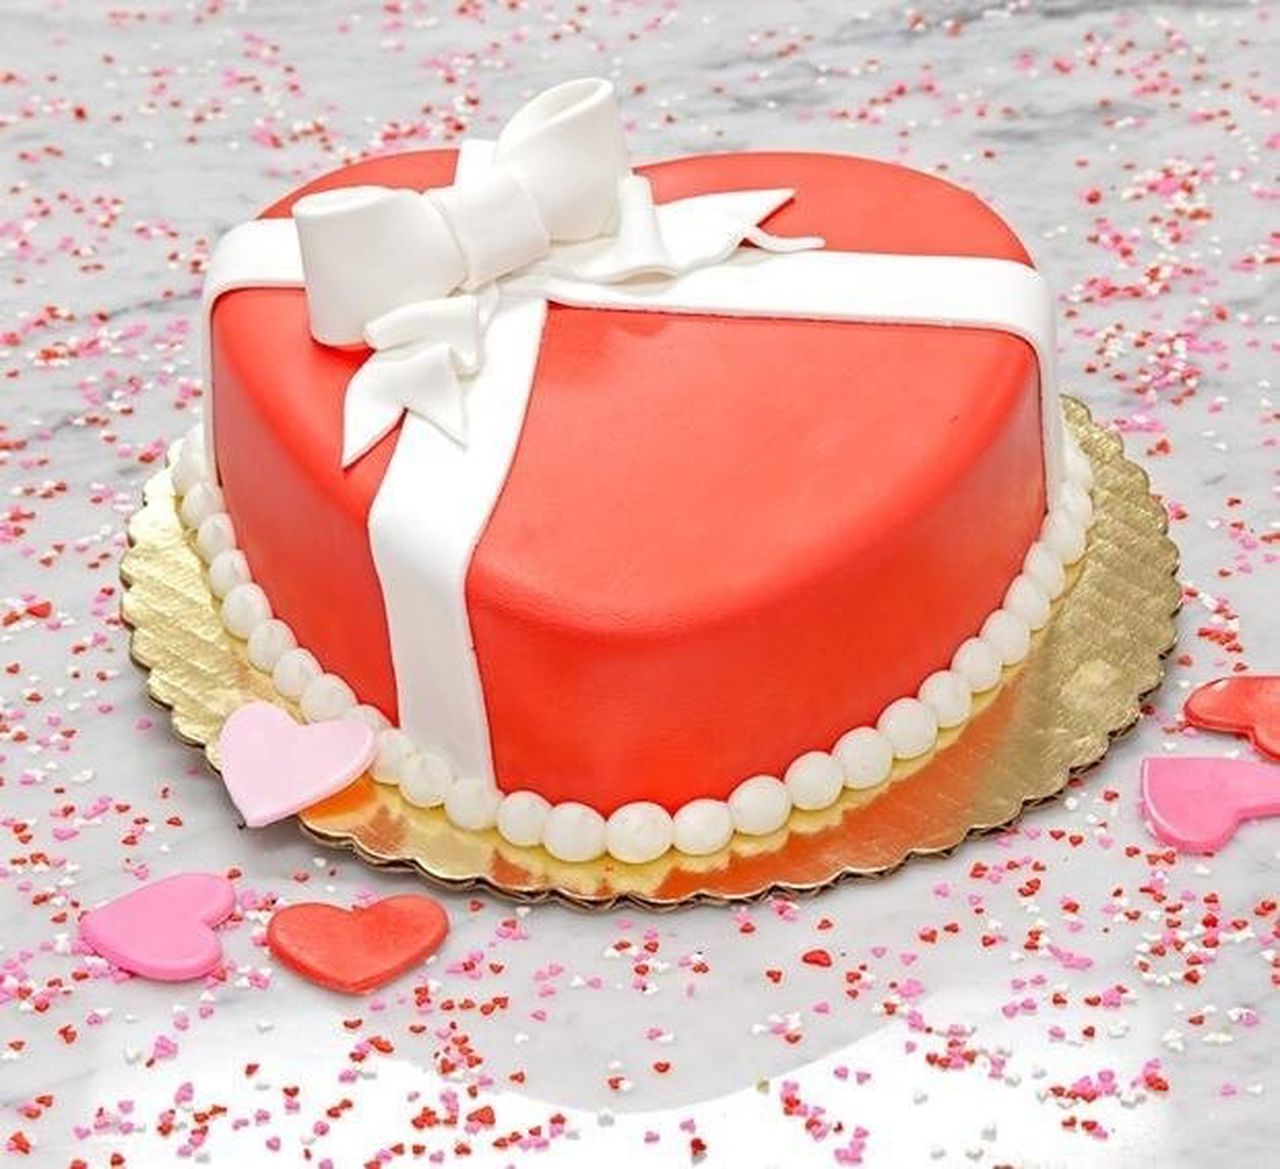 Cake Boss, other bakeries offer sweet treats for your Valentine